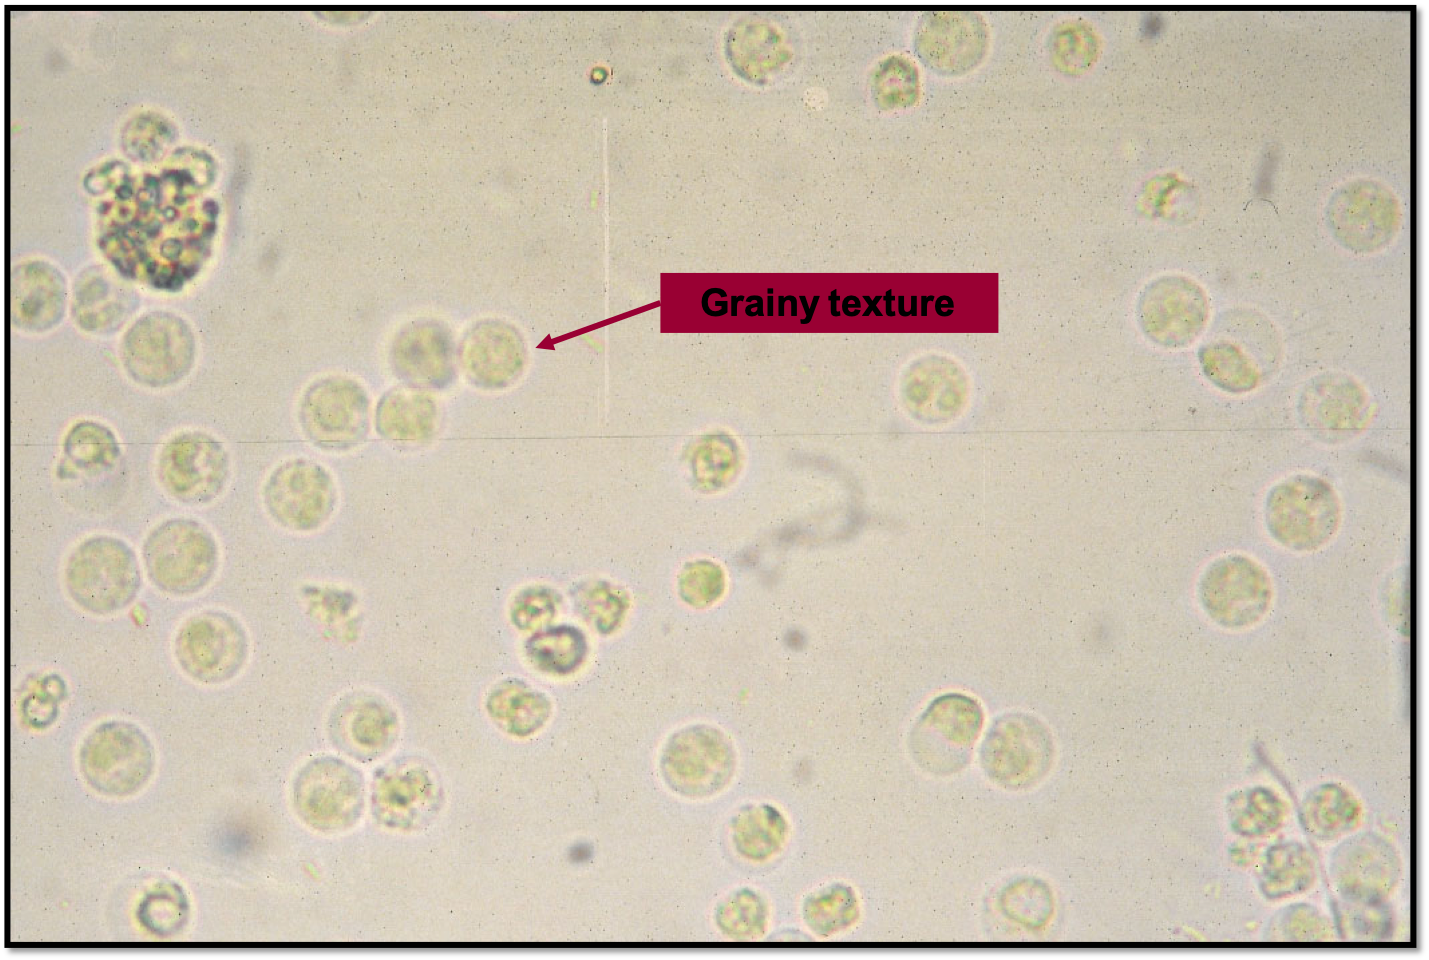 40x magnification of WBCs in urine. There are also low numbers of RBCs in this image